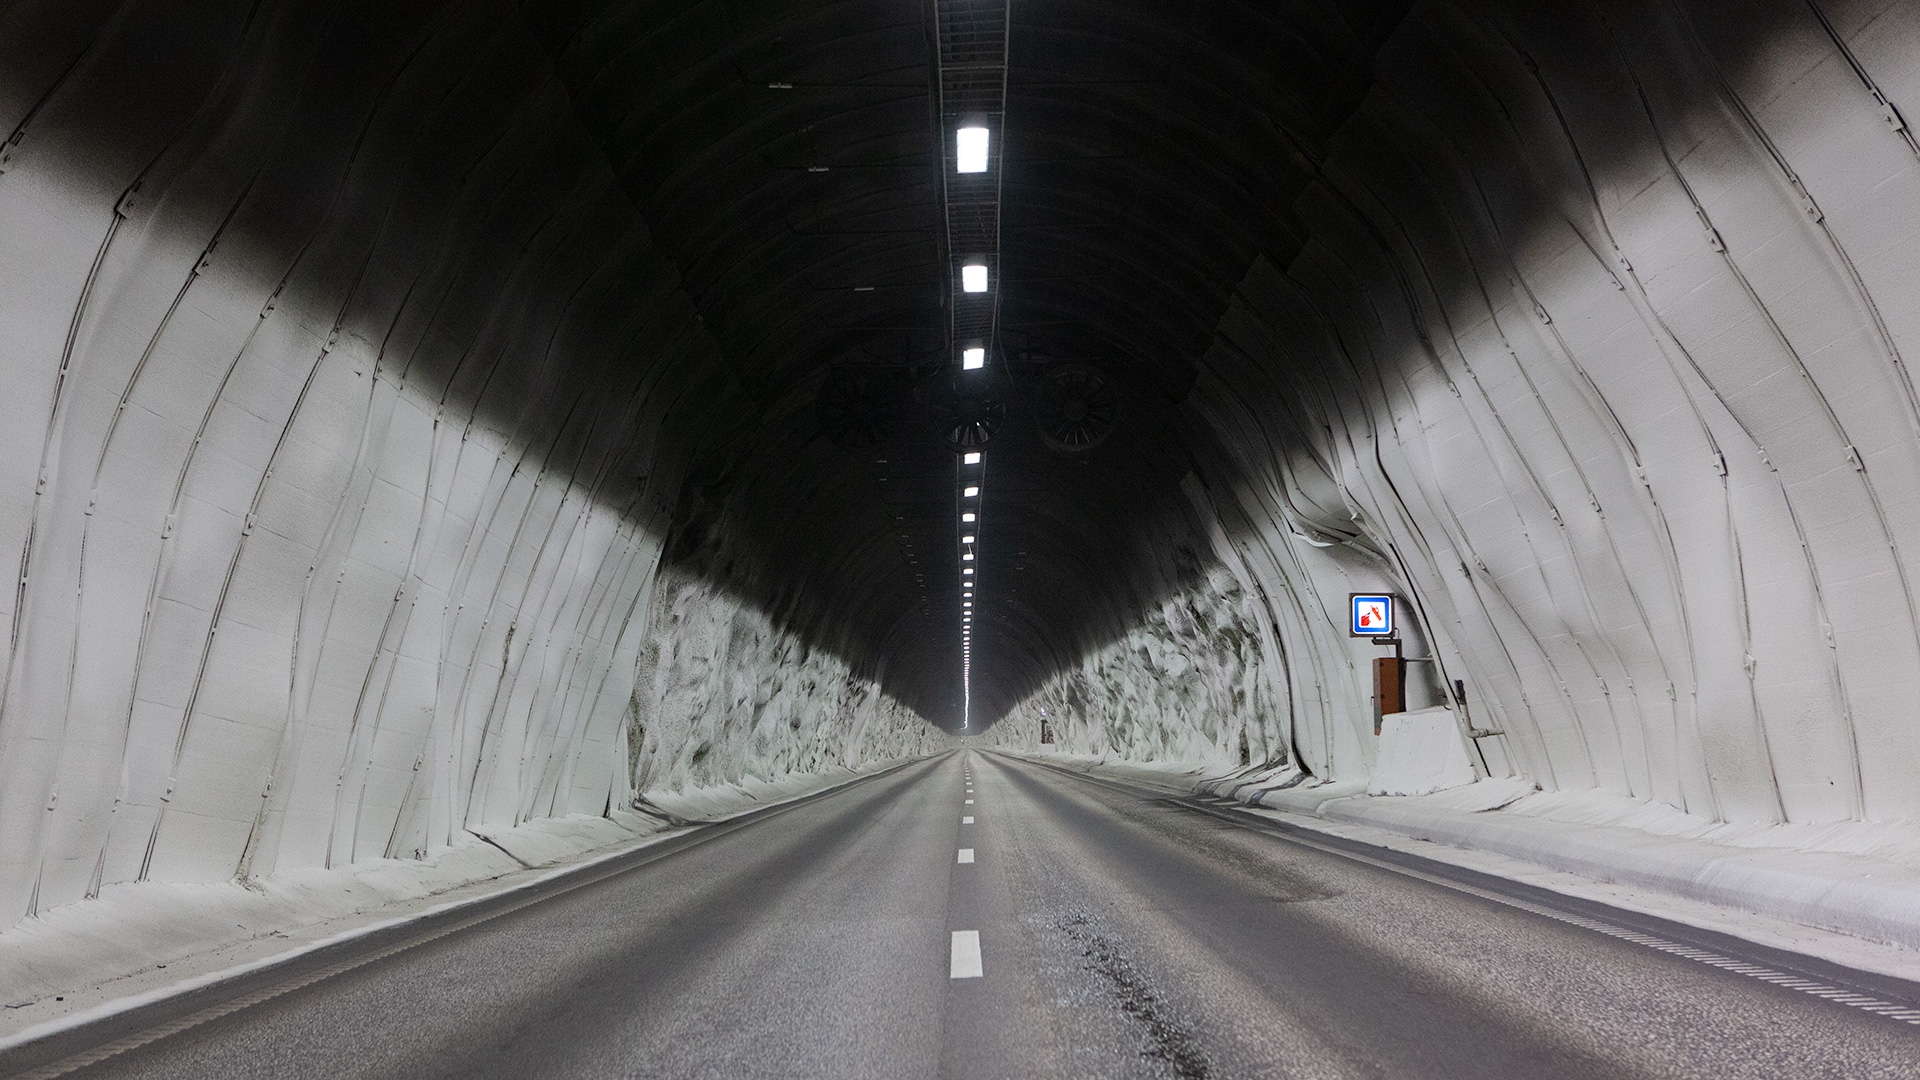 Less anxiety by using white coating in tunnels